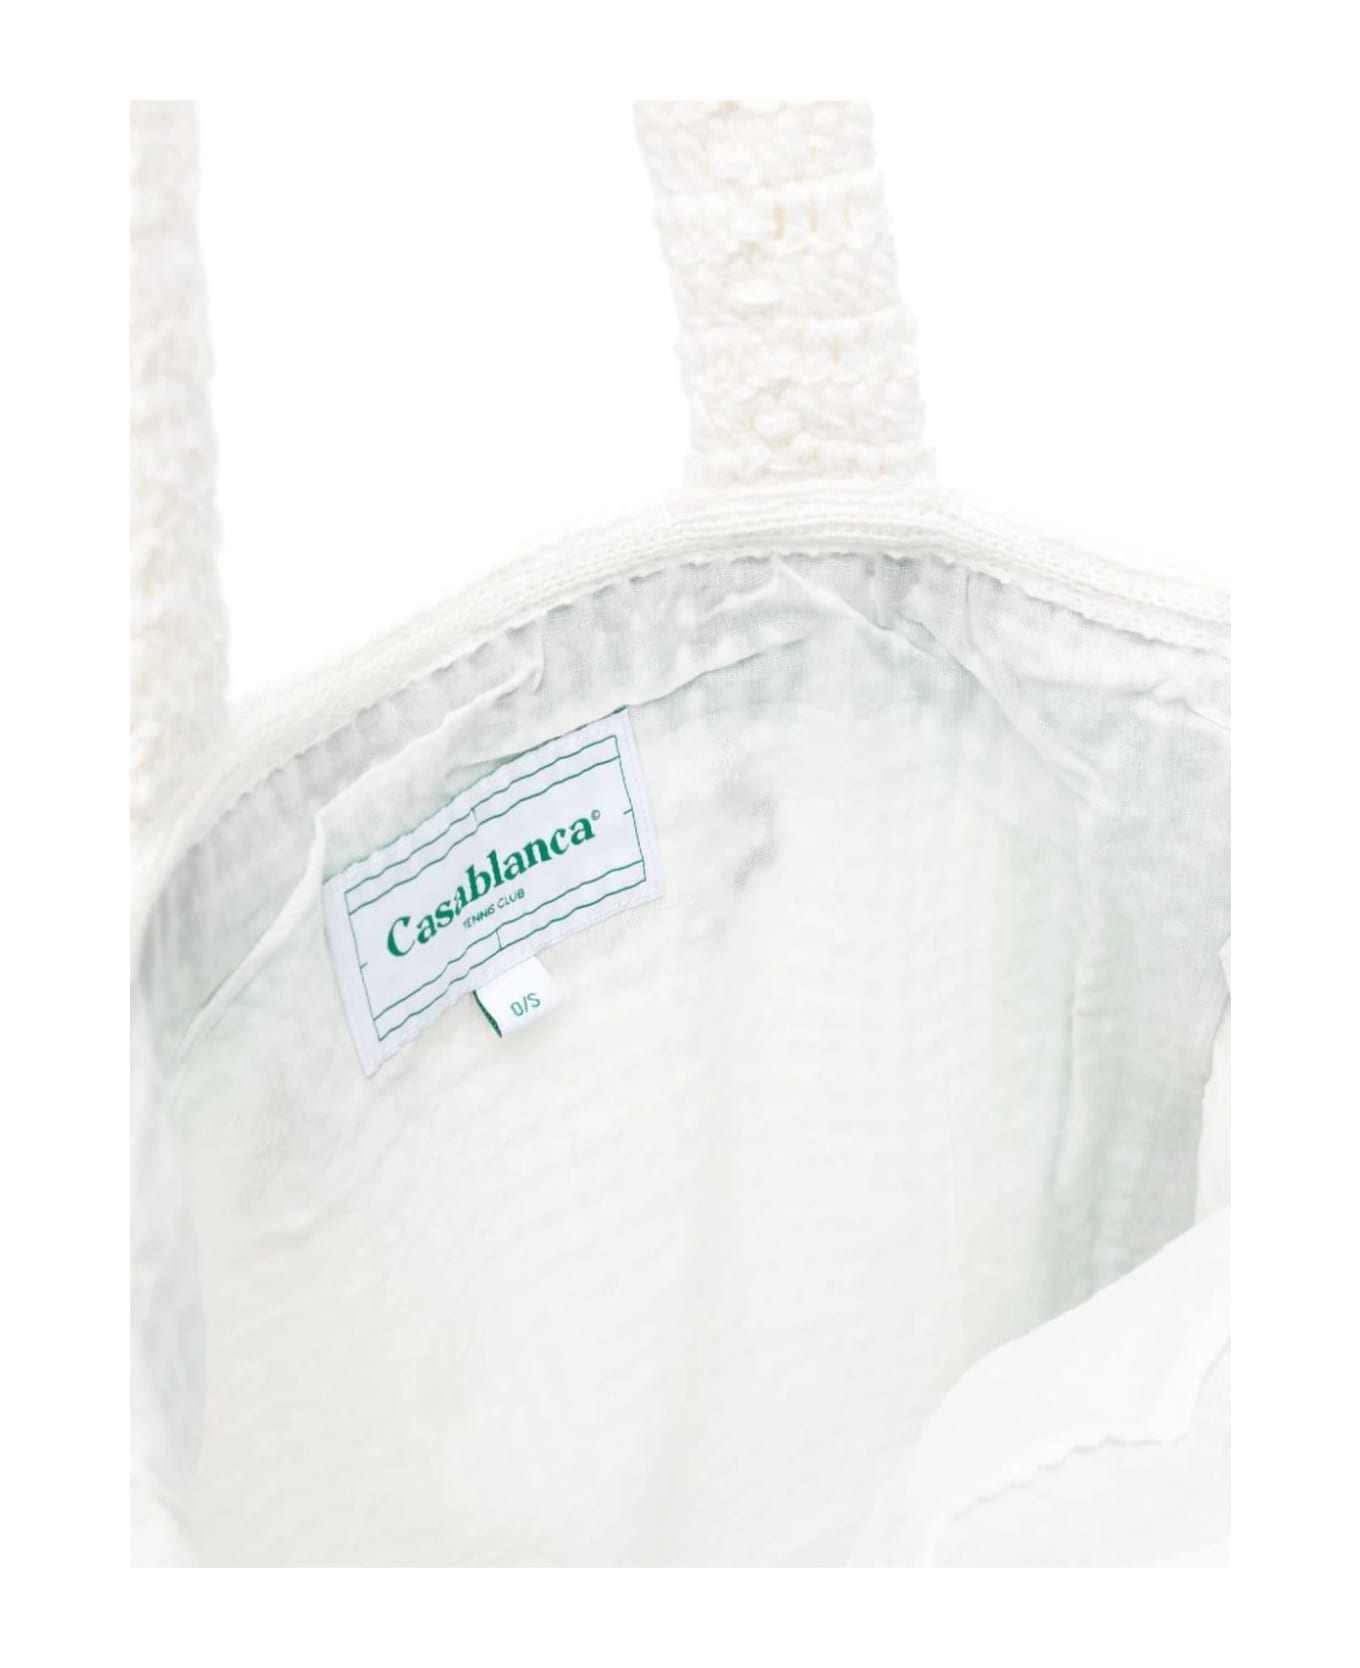 Casablanca Crocheted Tennis Tote Bag In Green And White - Green